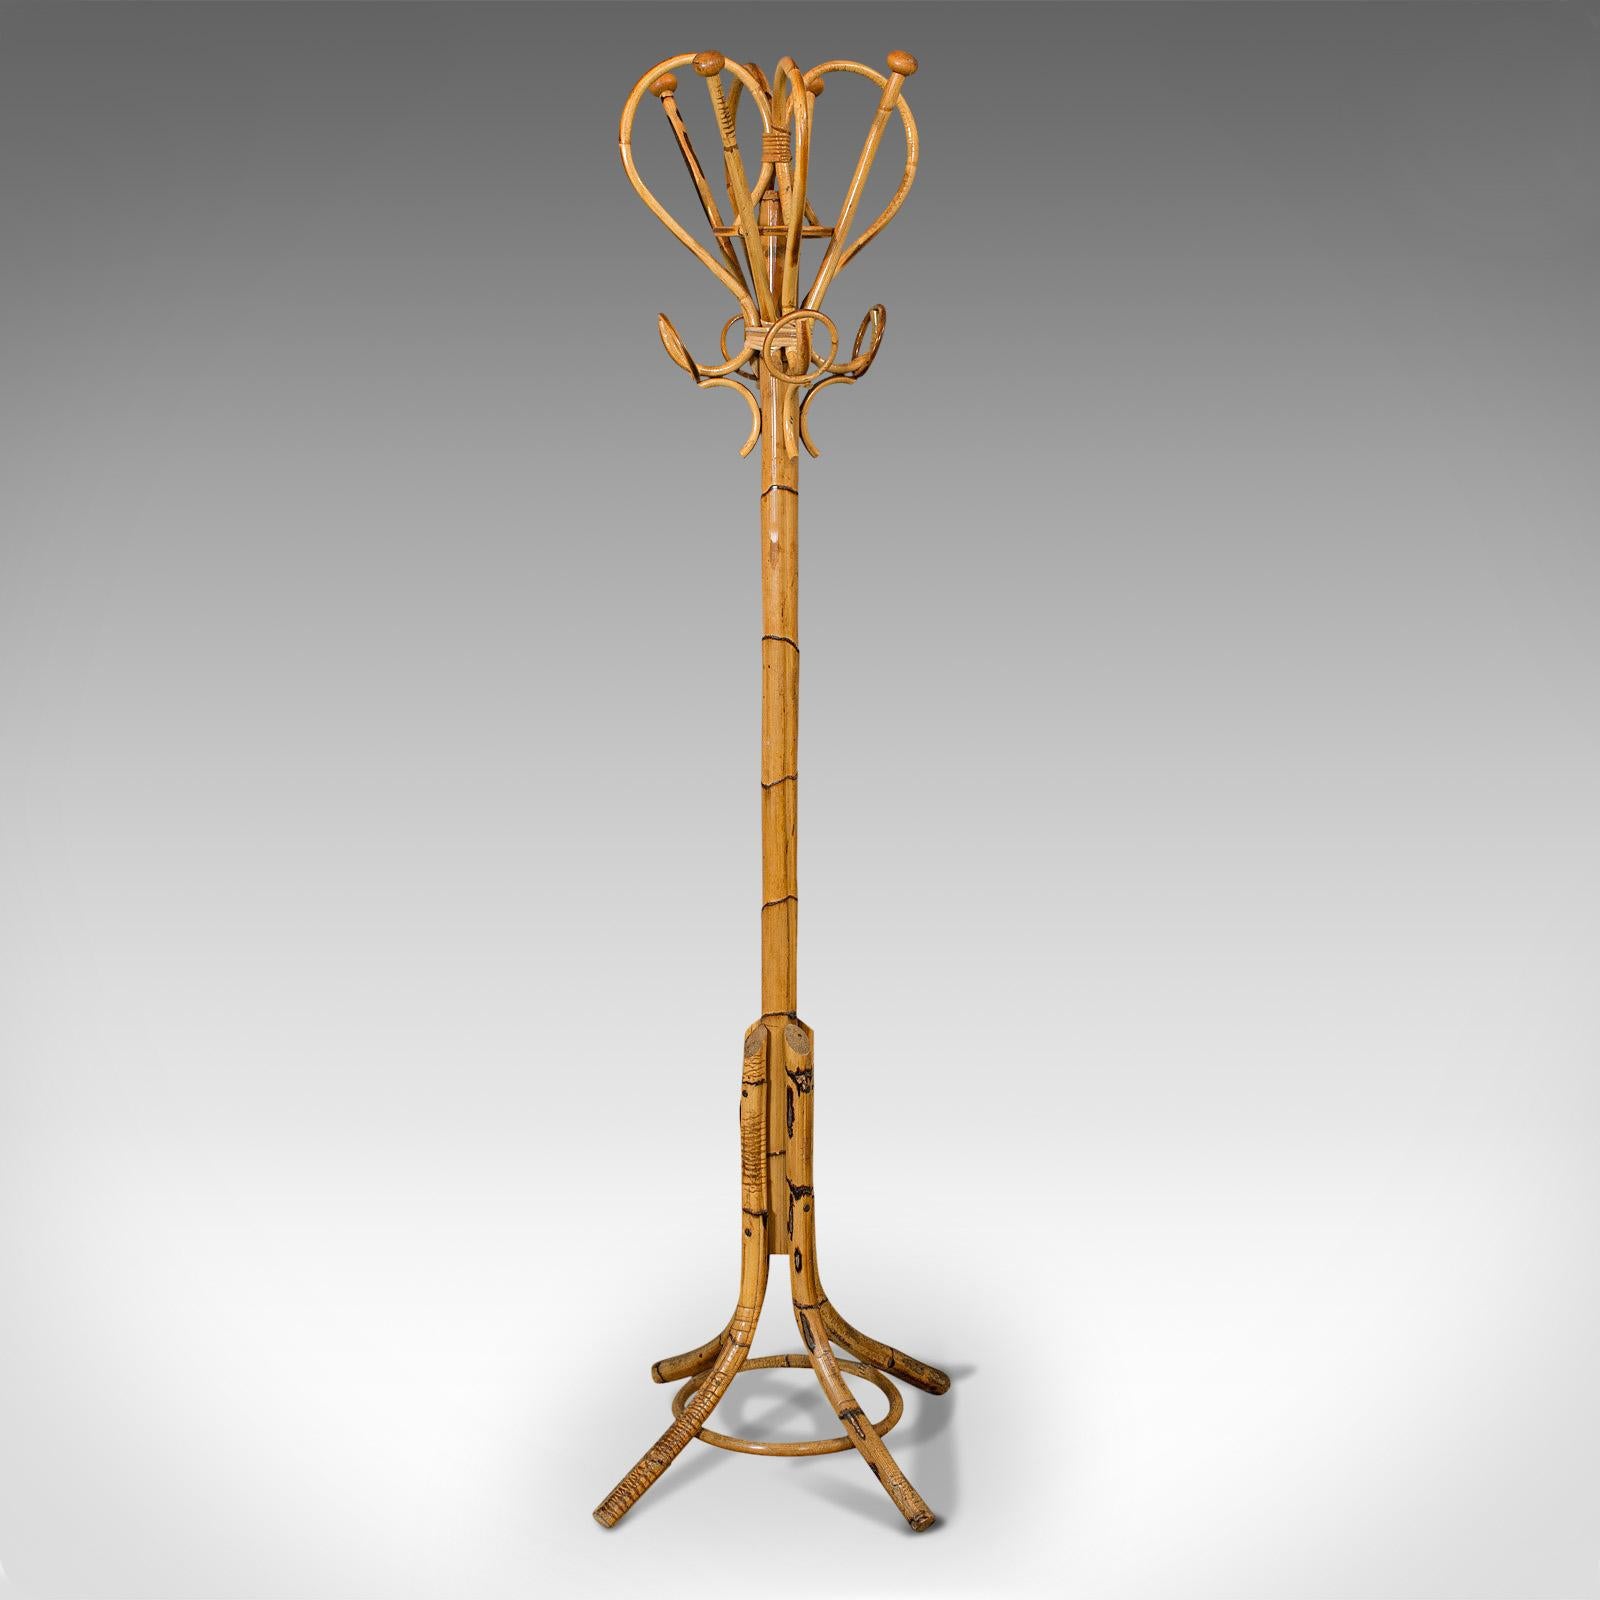 This is a vintage hall stand. A Continental, bamboo coat and hat rack dating to the mid-20th century, circa 1960.

Pleasingly crafted bamboo stand
Displays a desirable aged patina
Bamboo shows fine color


Looped upper rails with a quartet of hat